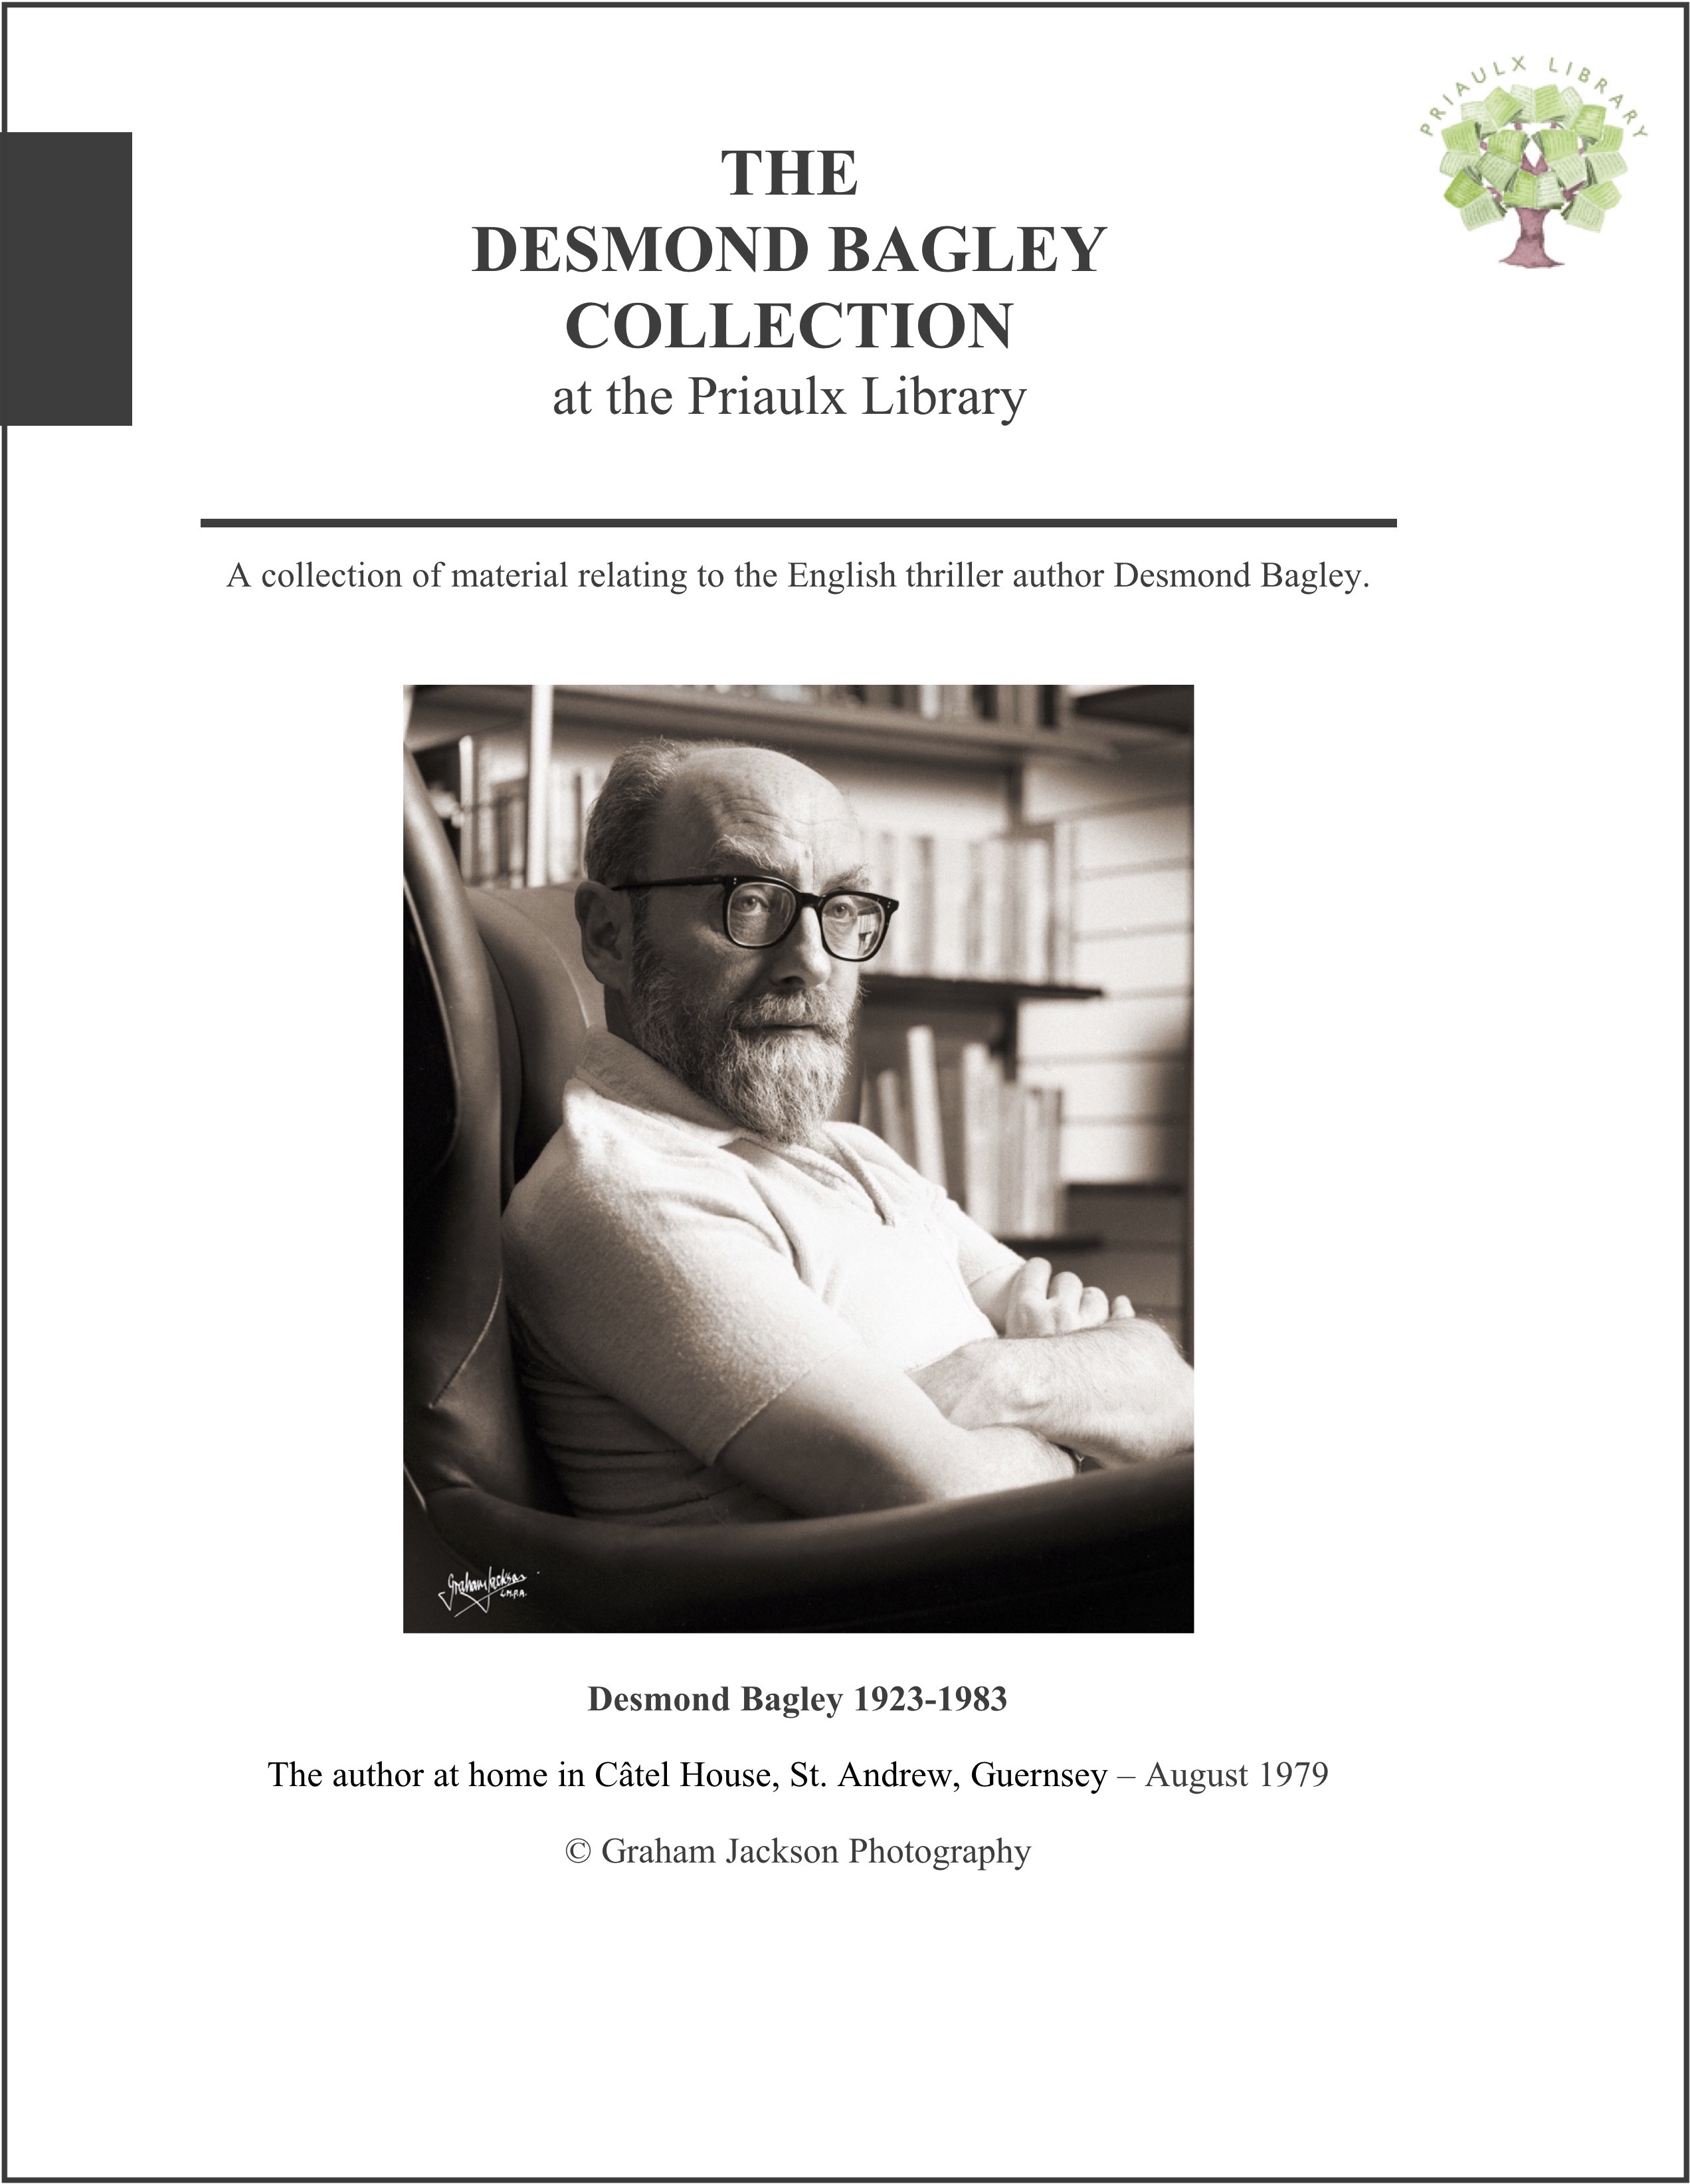 The Desmond Bagley Collection at the Priaulx Library, Candie House, Candie Gardens, St. Peter Port, Guernsey. © The Bagley Brief.